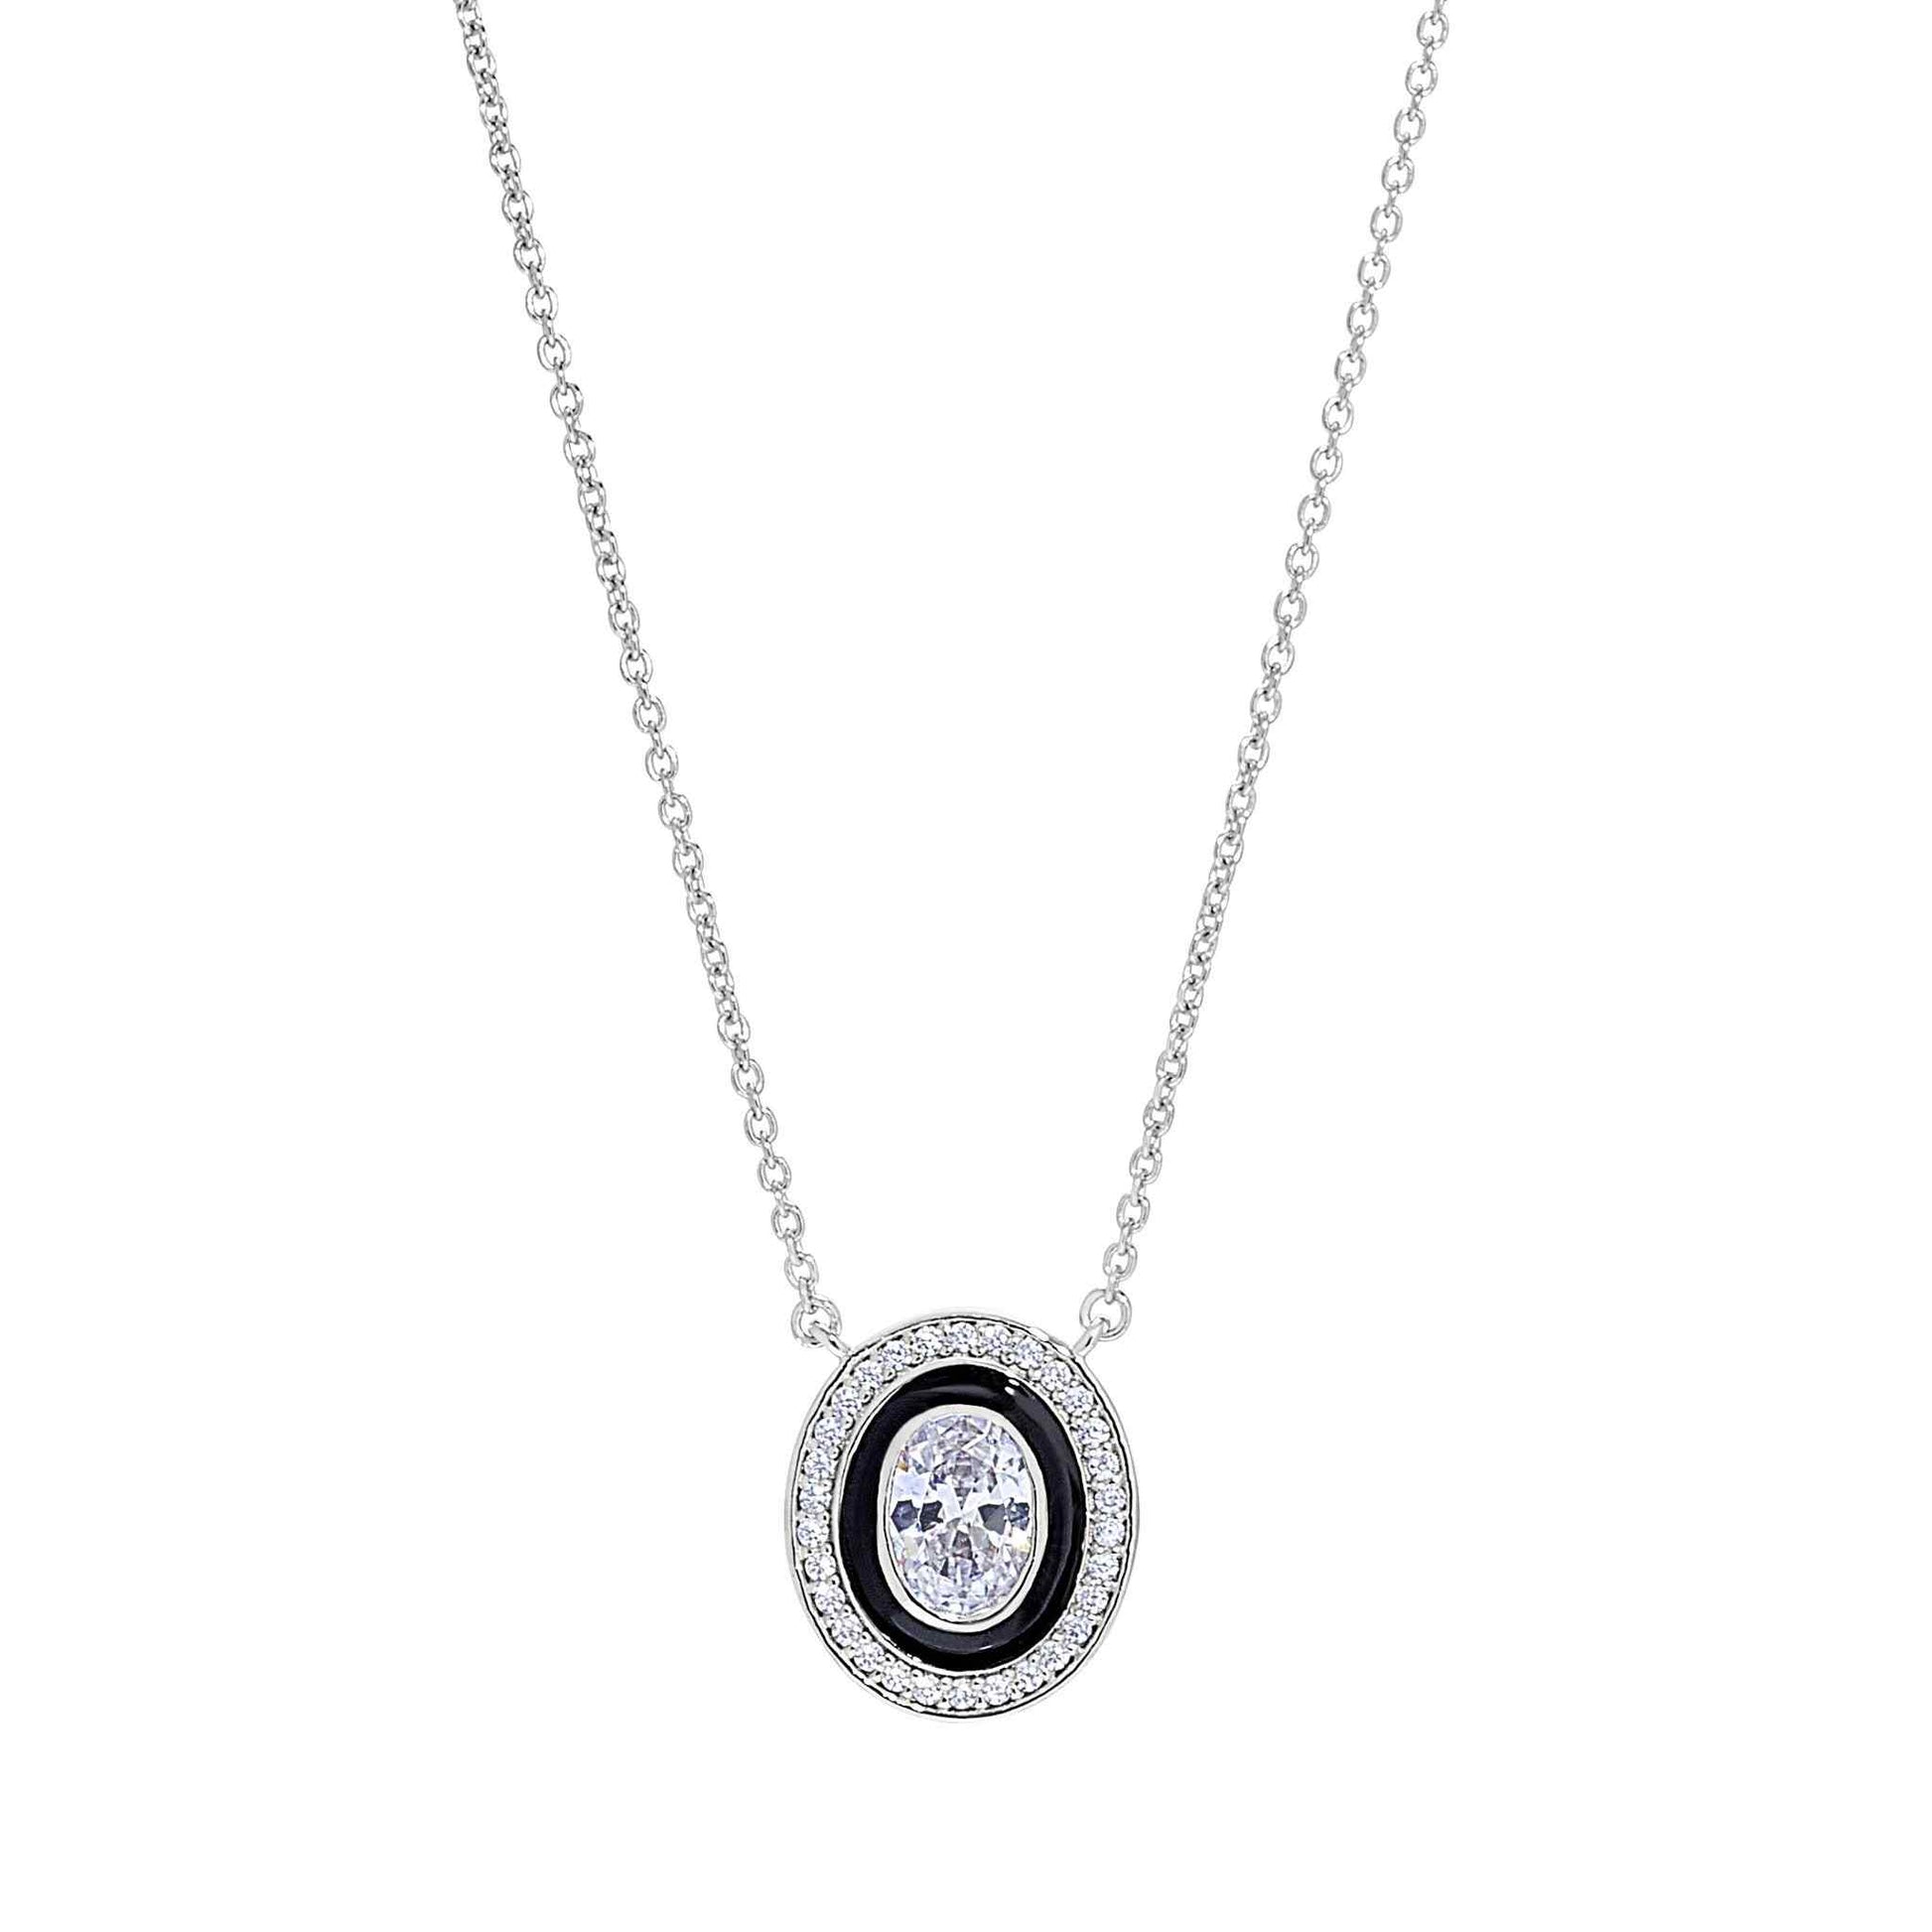 A oval halo necklace with black enamel and simulated diamonds displayed on a neutral white background.